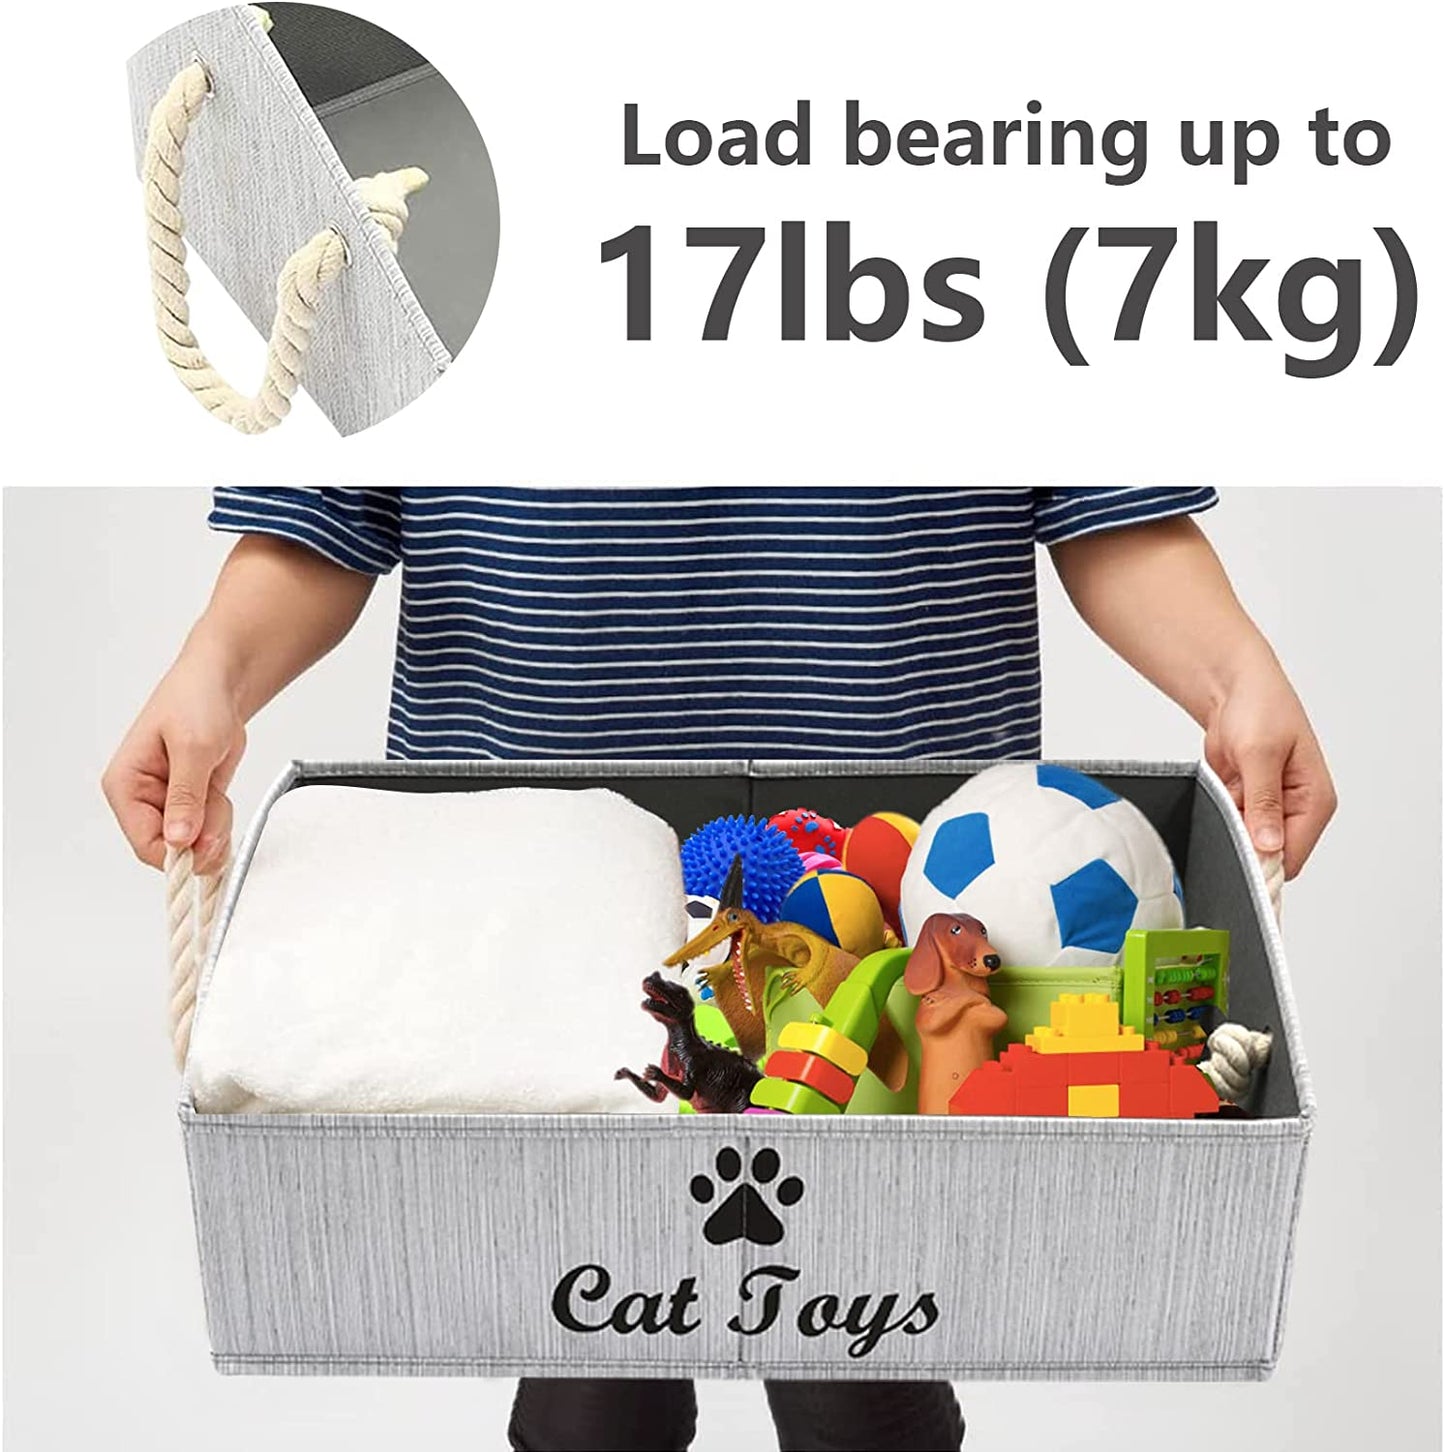 Large Cat Toys Storage Bins - Foldable Fabric Trapezoid Organizer Boxes with Weave Rope Handle, Collapsible Basket for Shelves,Cat Toys,Cat Apparel & Accessories(Gray-Cat)